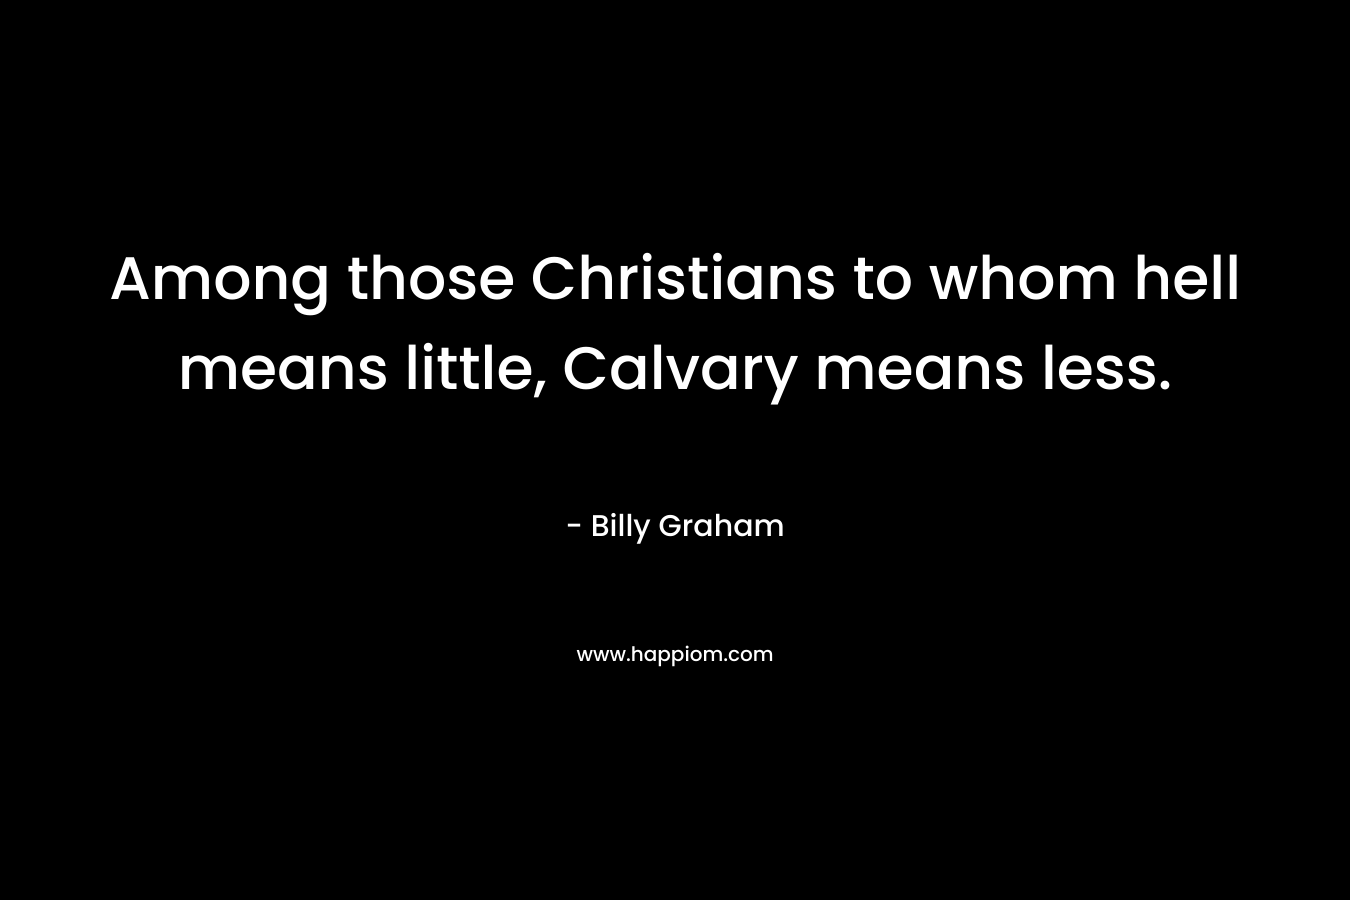 Among those Christians to whom hell means little, Calvary means less. – Billy Graham